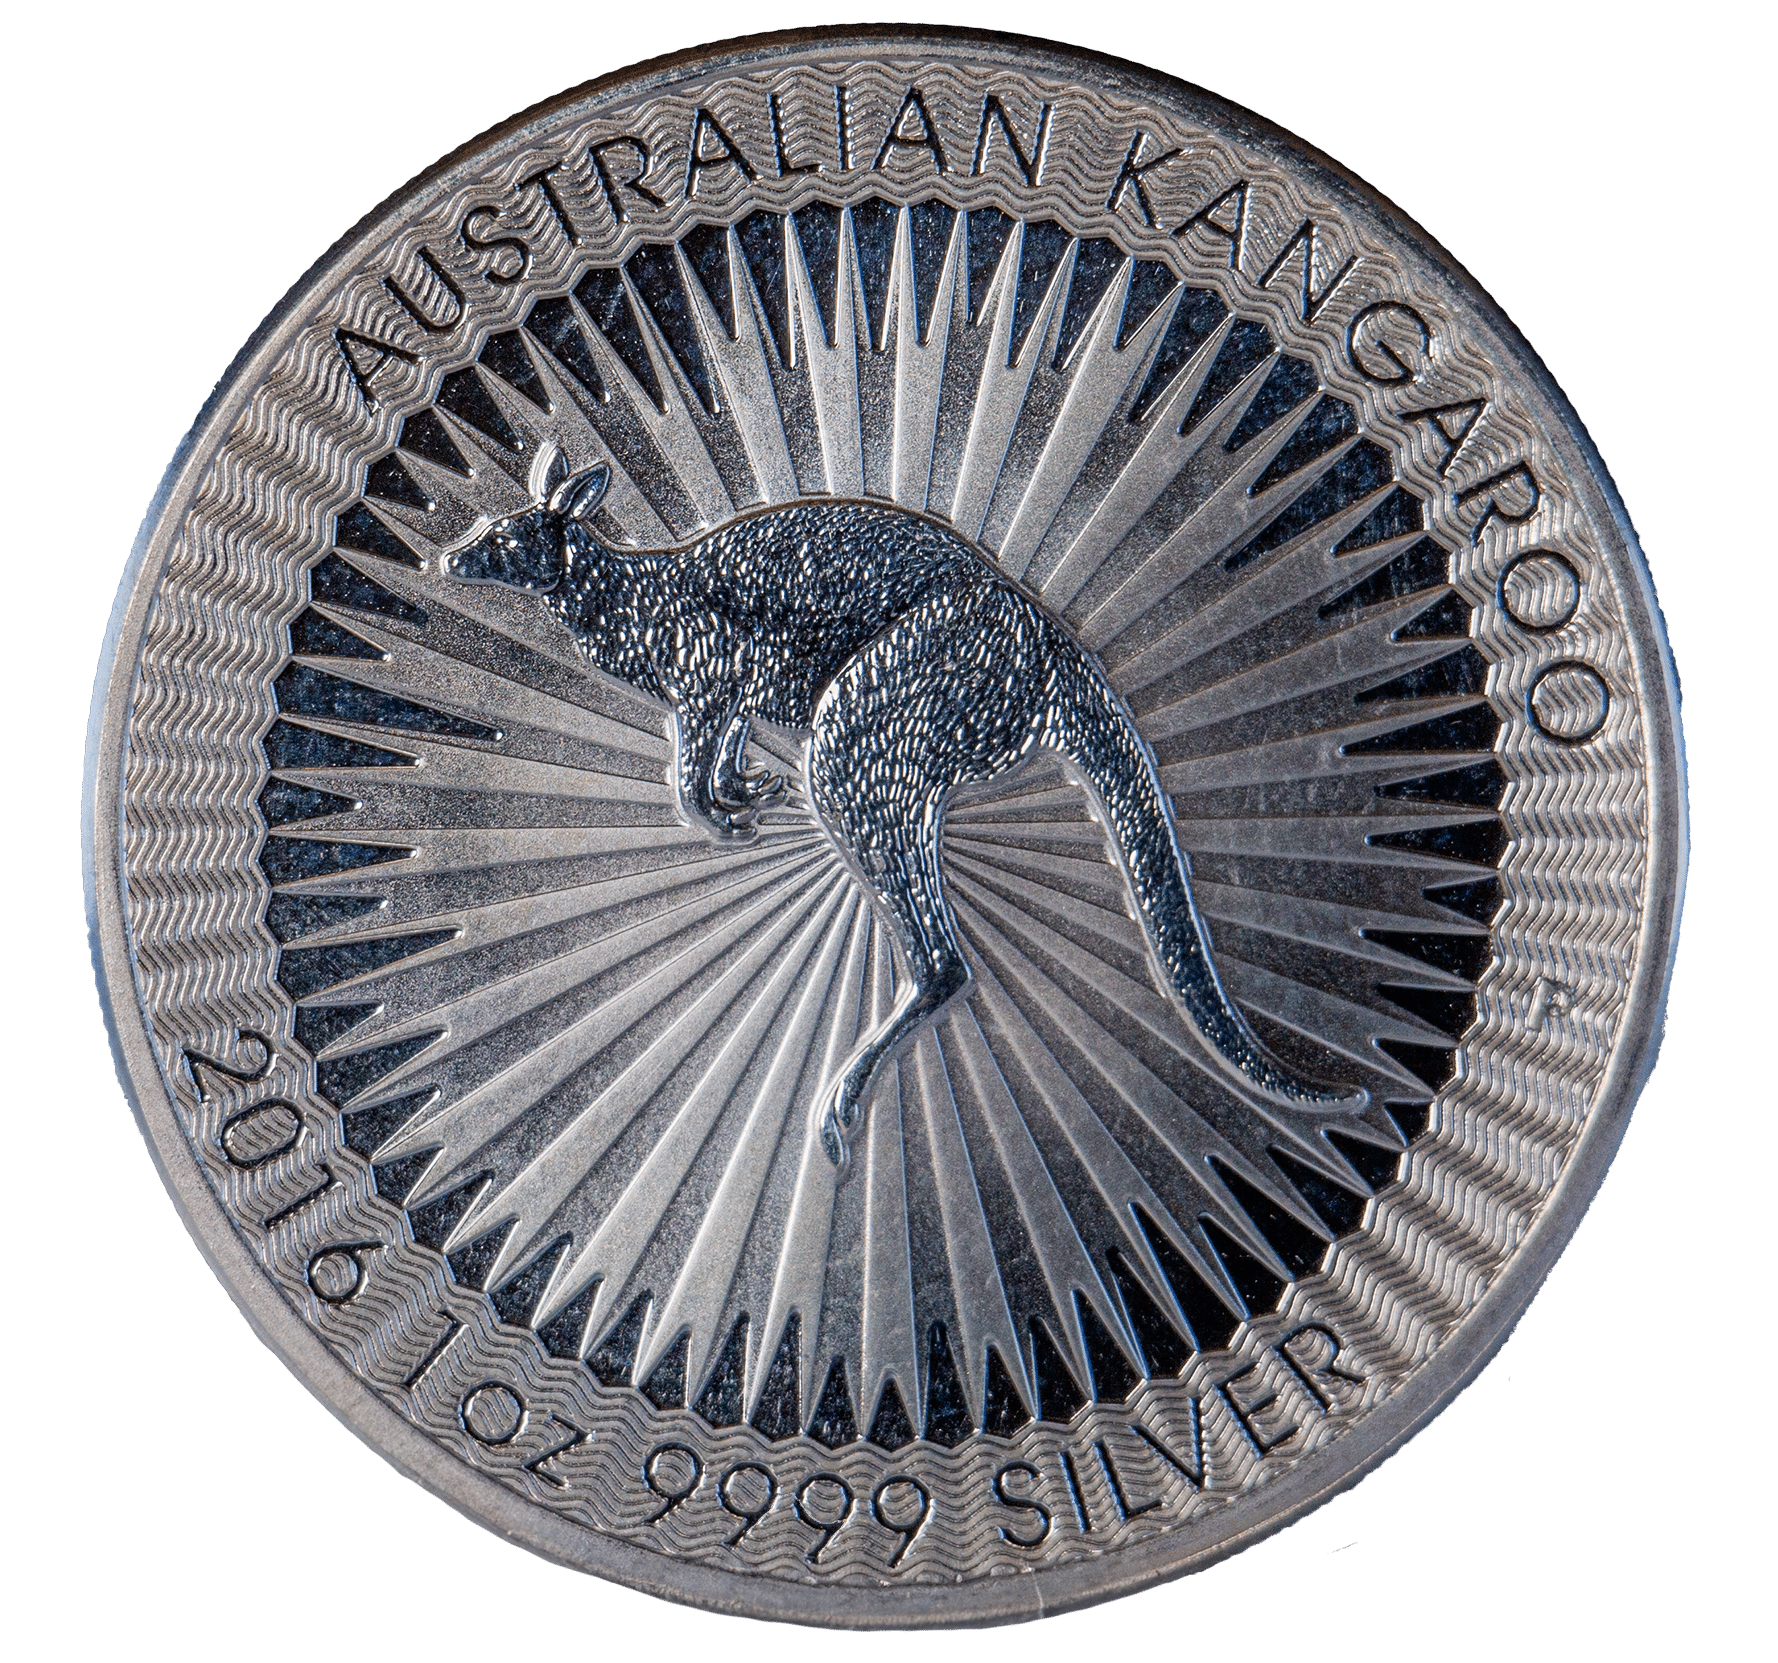 1-ounce Australian Silver Kangaroo coin against a muted background.